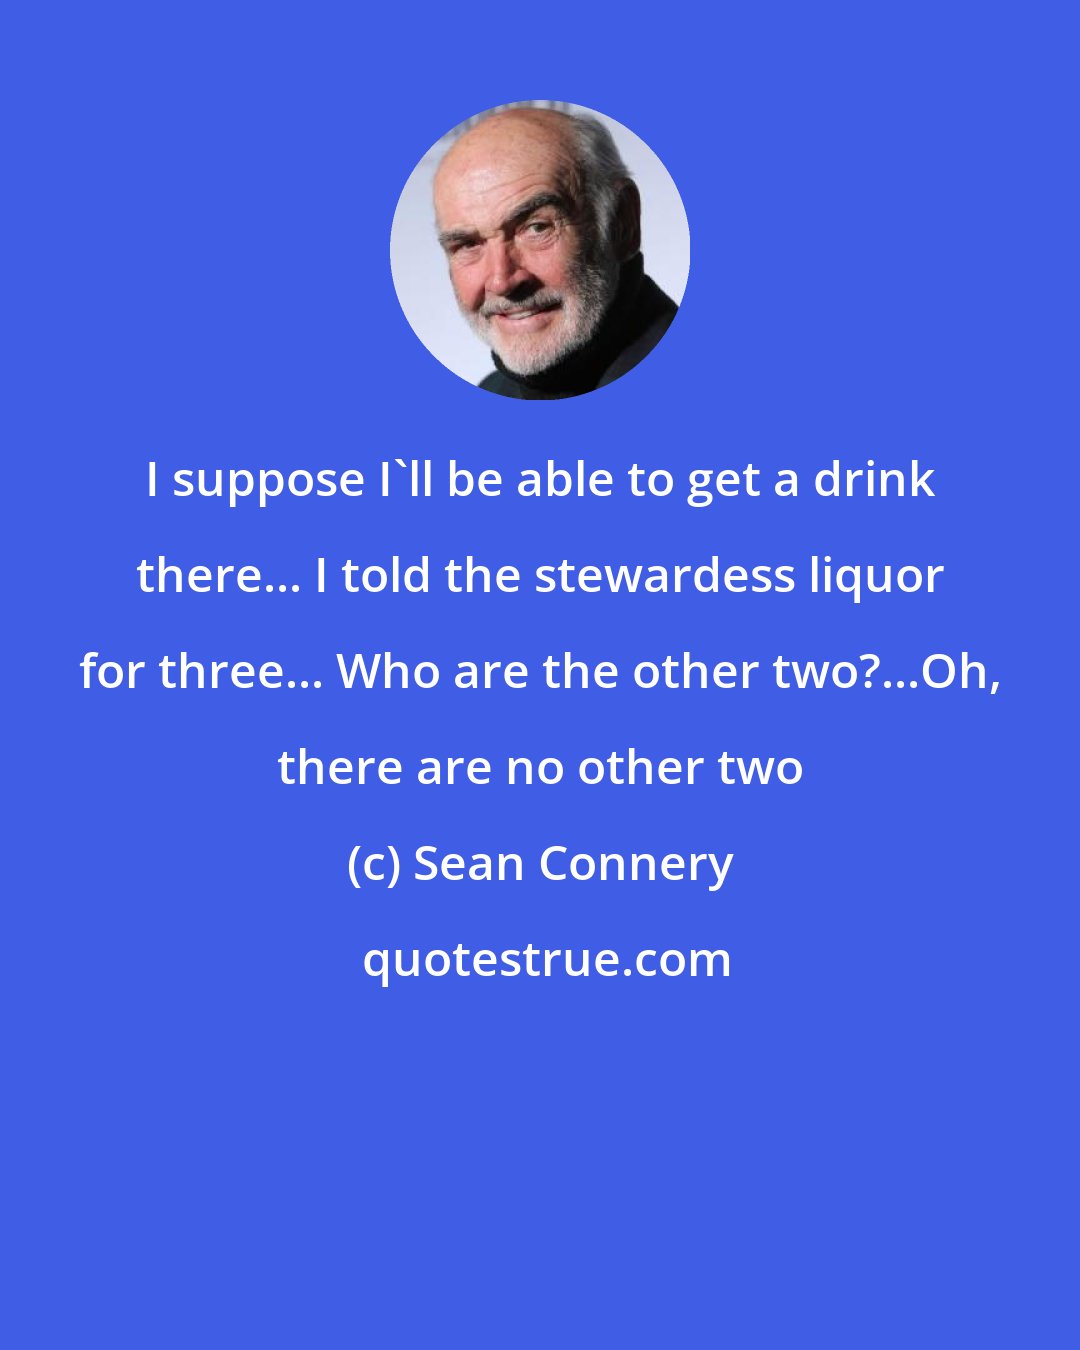 Sean Connery: I suppose I'll be able to get a drink there... I told the stewardess liquor for three... Who are the other two?...Oh, there are no other two